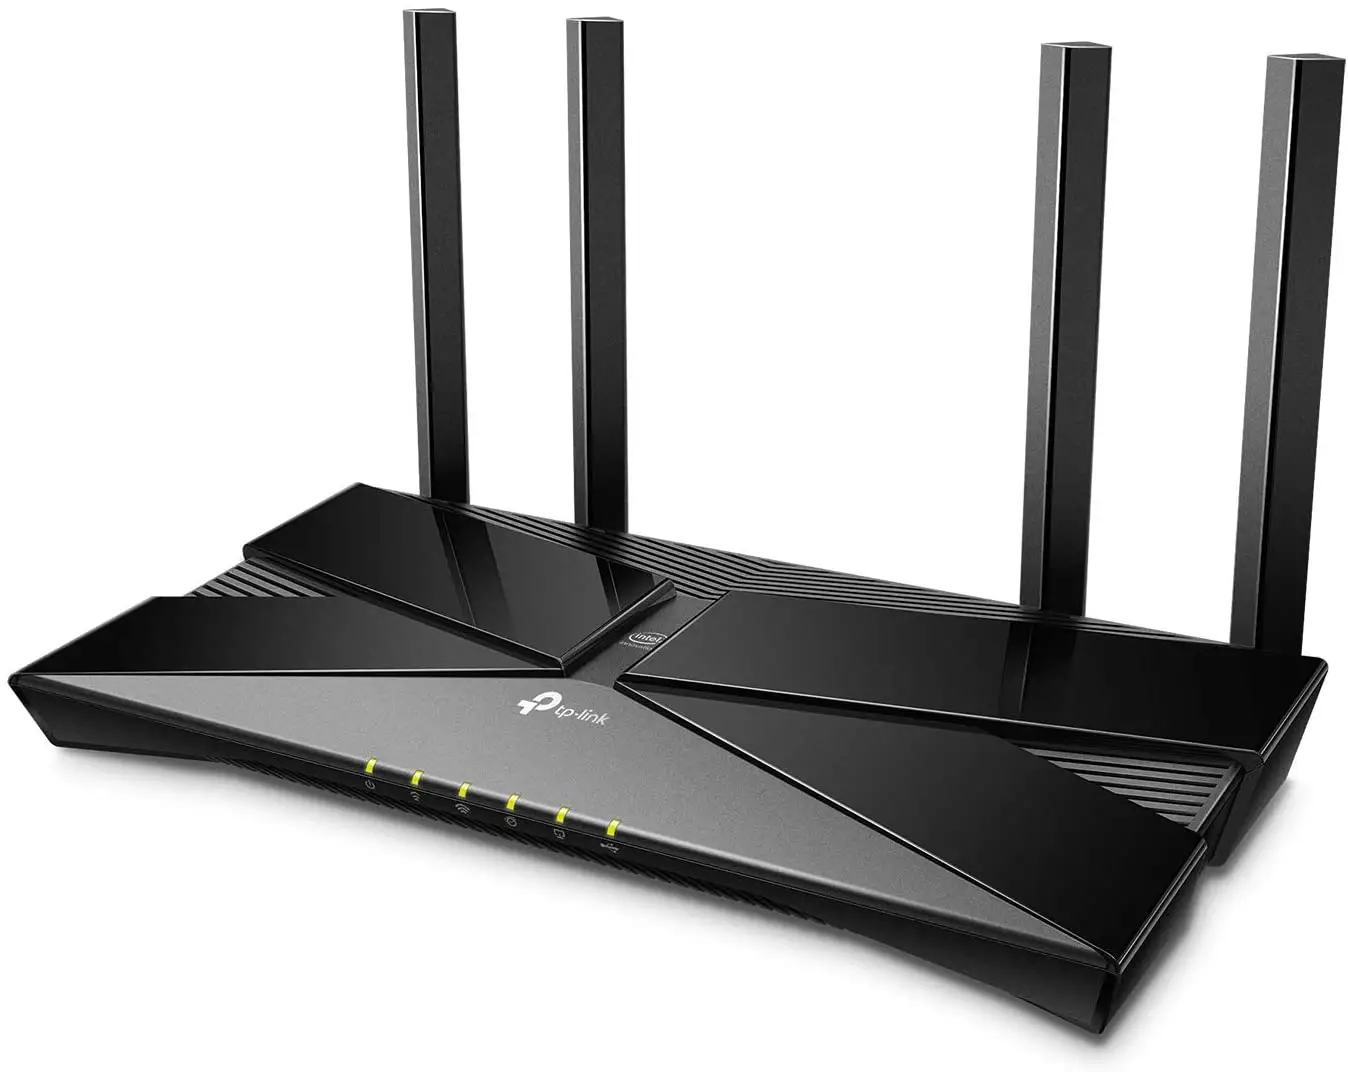 TP-Link WiFi 6 AX3000 Smart WiFi Router